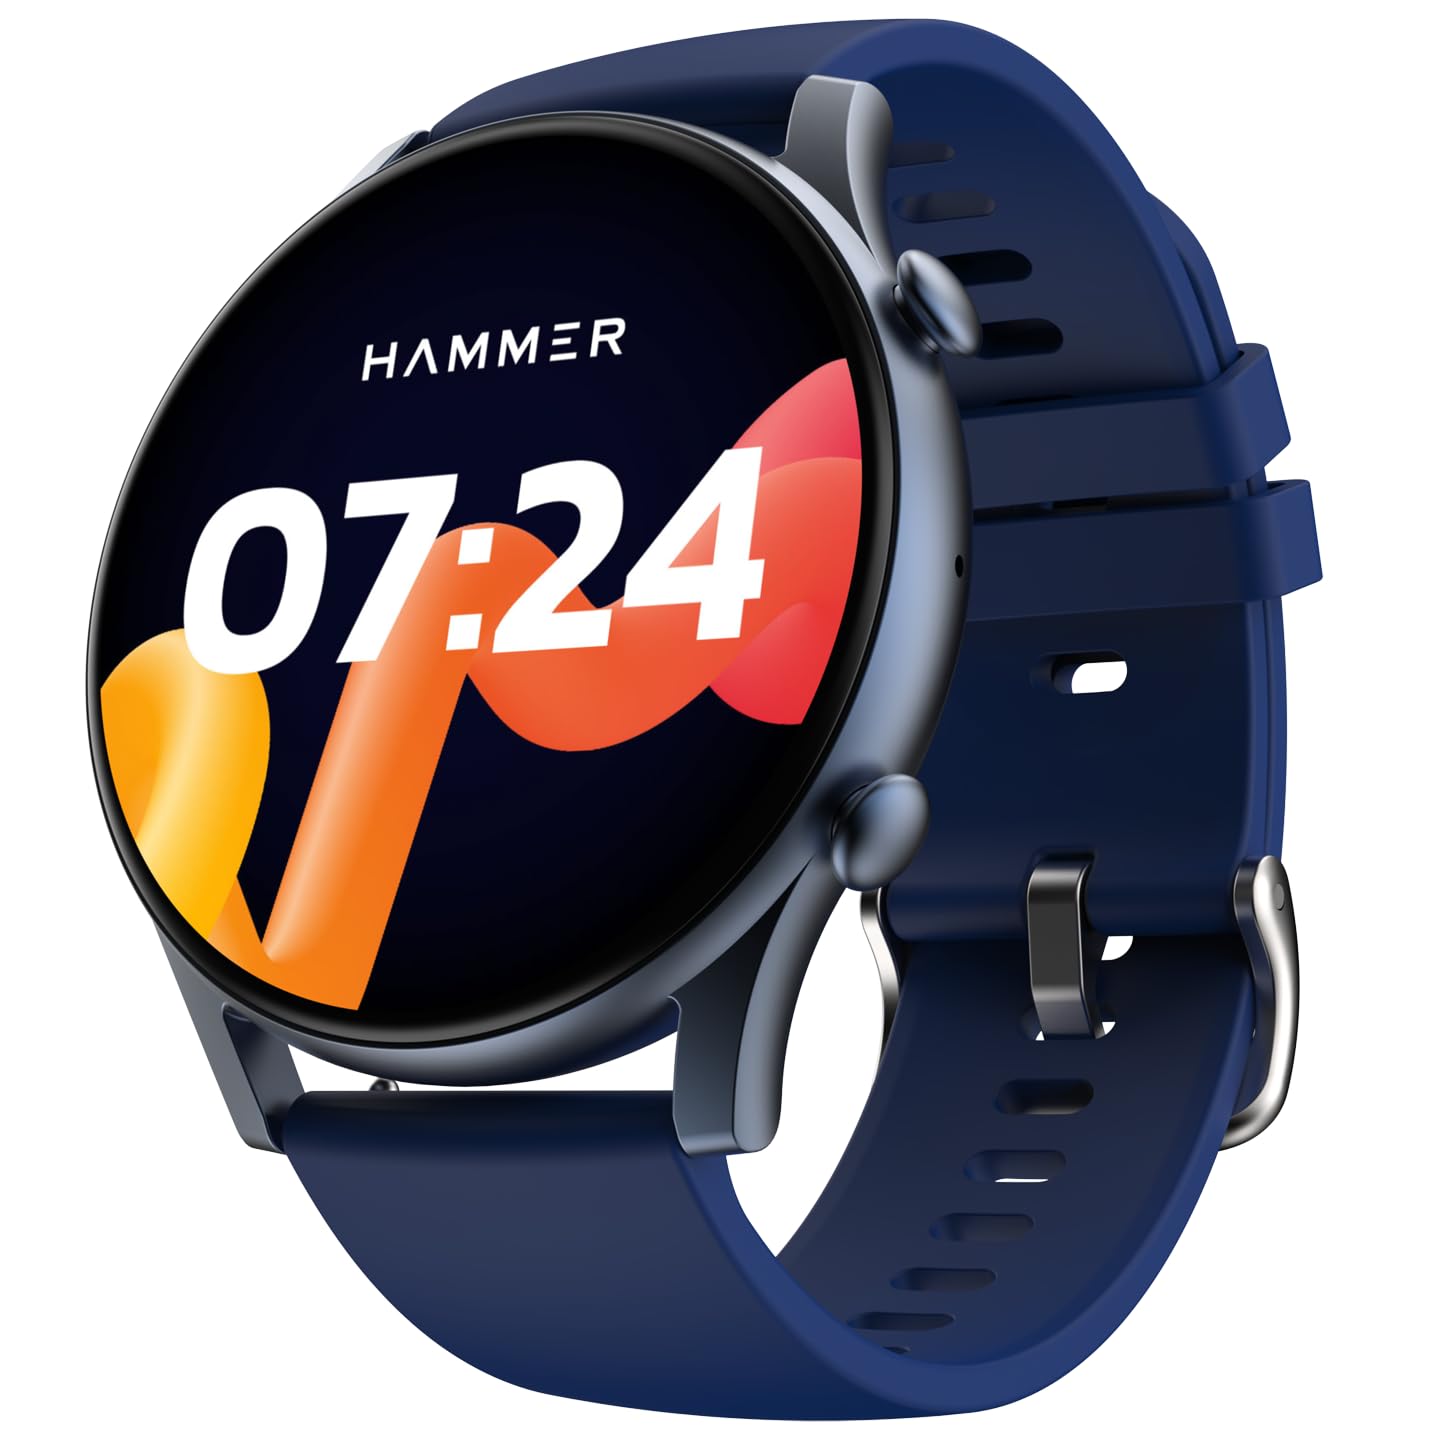 (Refurbished) HAMMER Glide 1.43" AMOLED Round Dial Smart Watch with Calling Function, Premium Metallic Build, Always on Display, Multiple Sports Modes (Electric Blue)